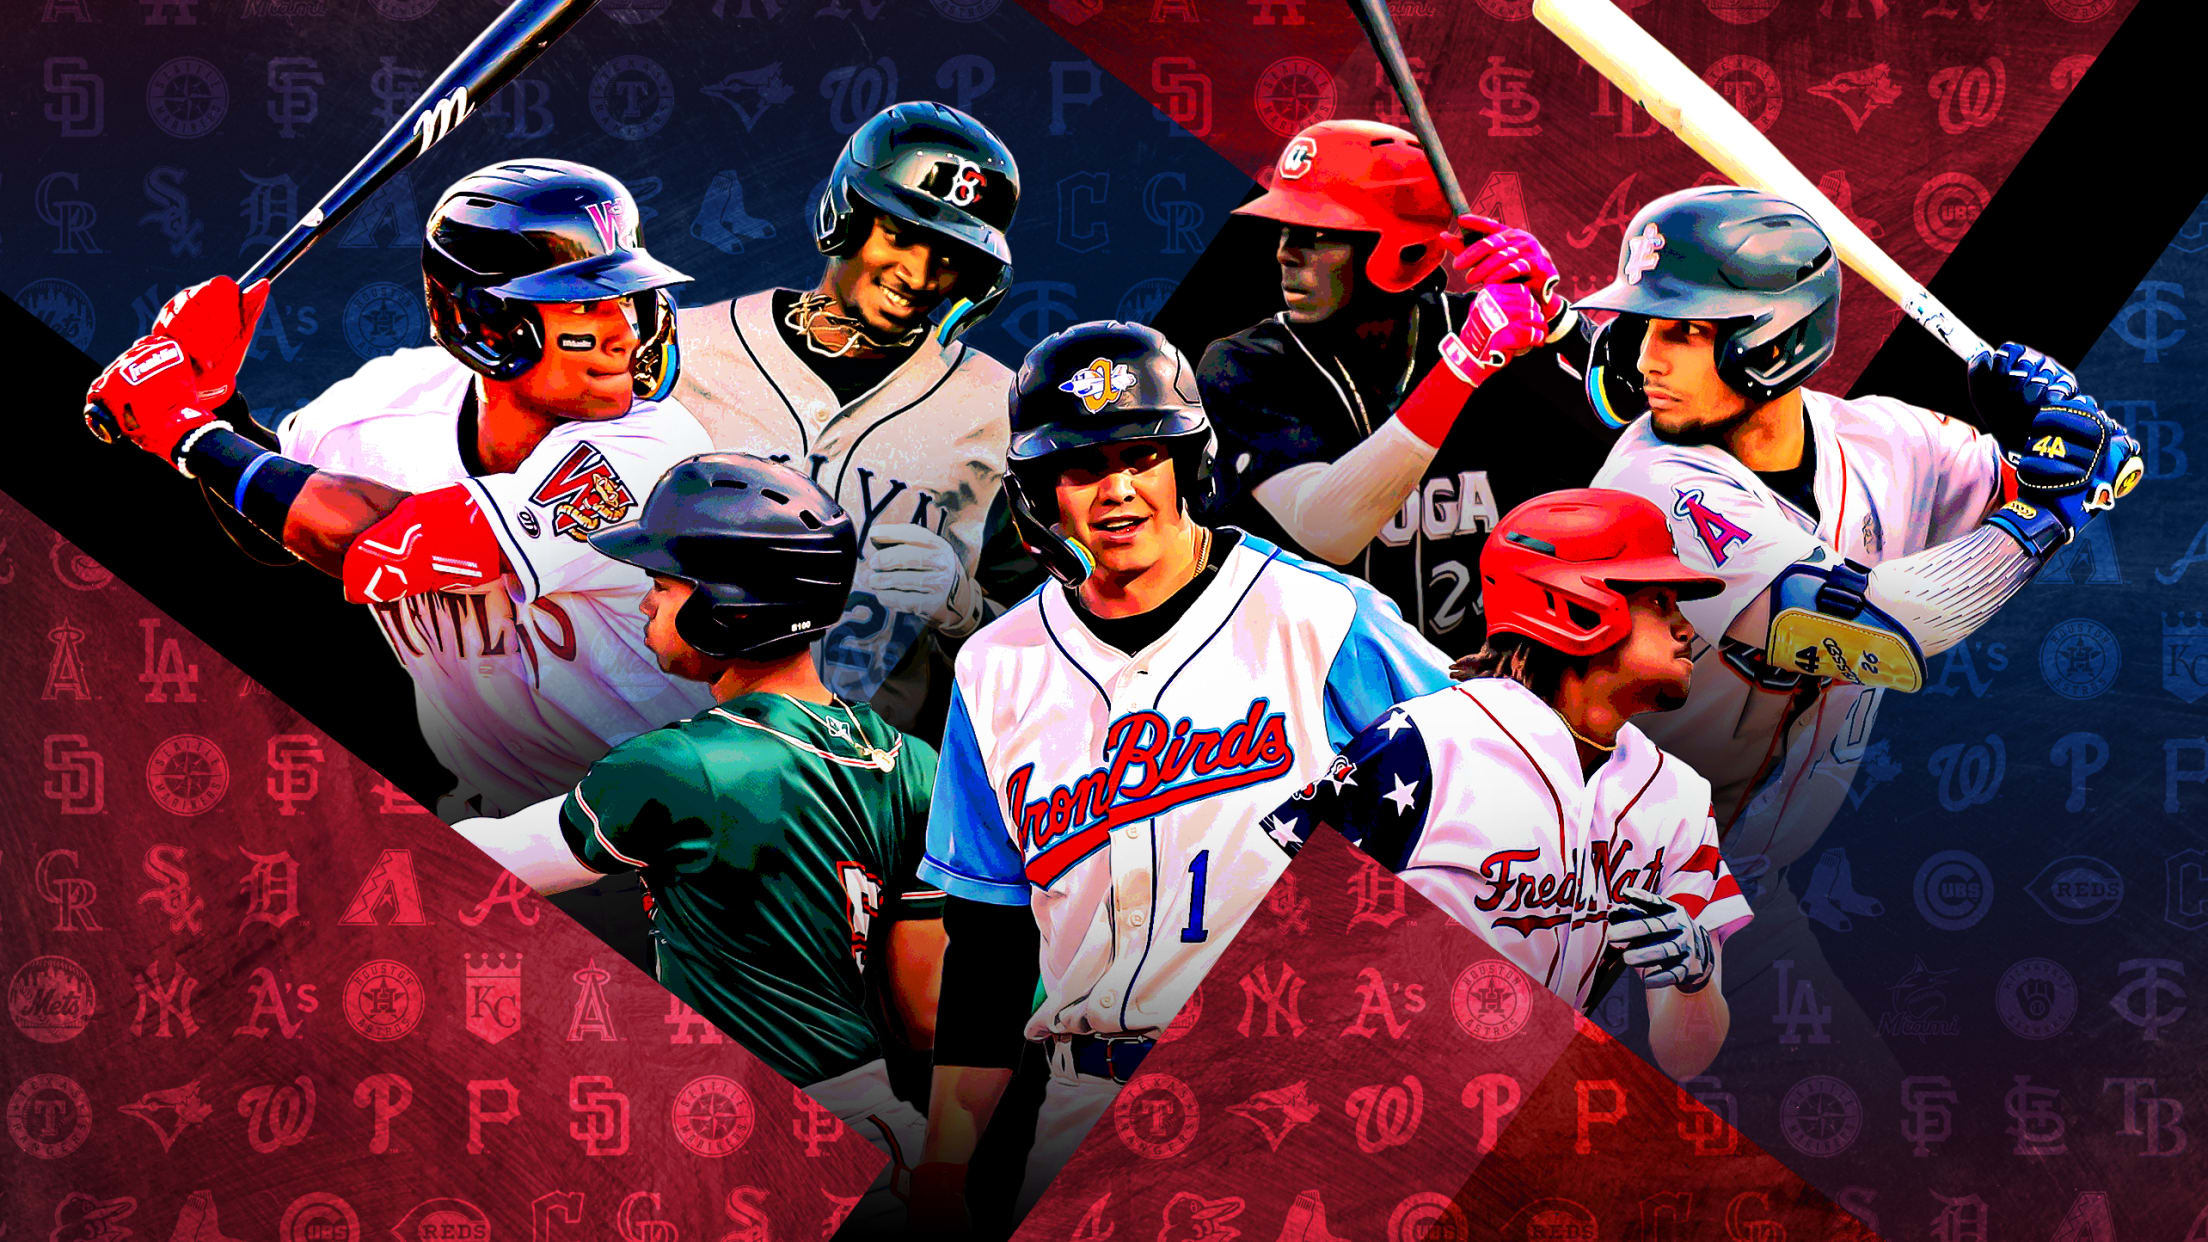 A photo illustration of 7 prospects in various playing poses against a red-and-blue background